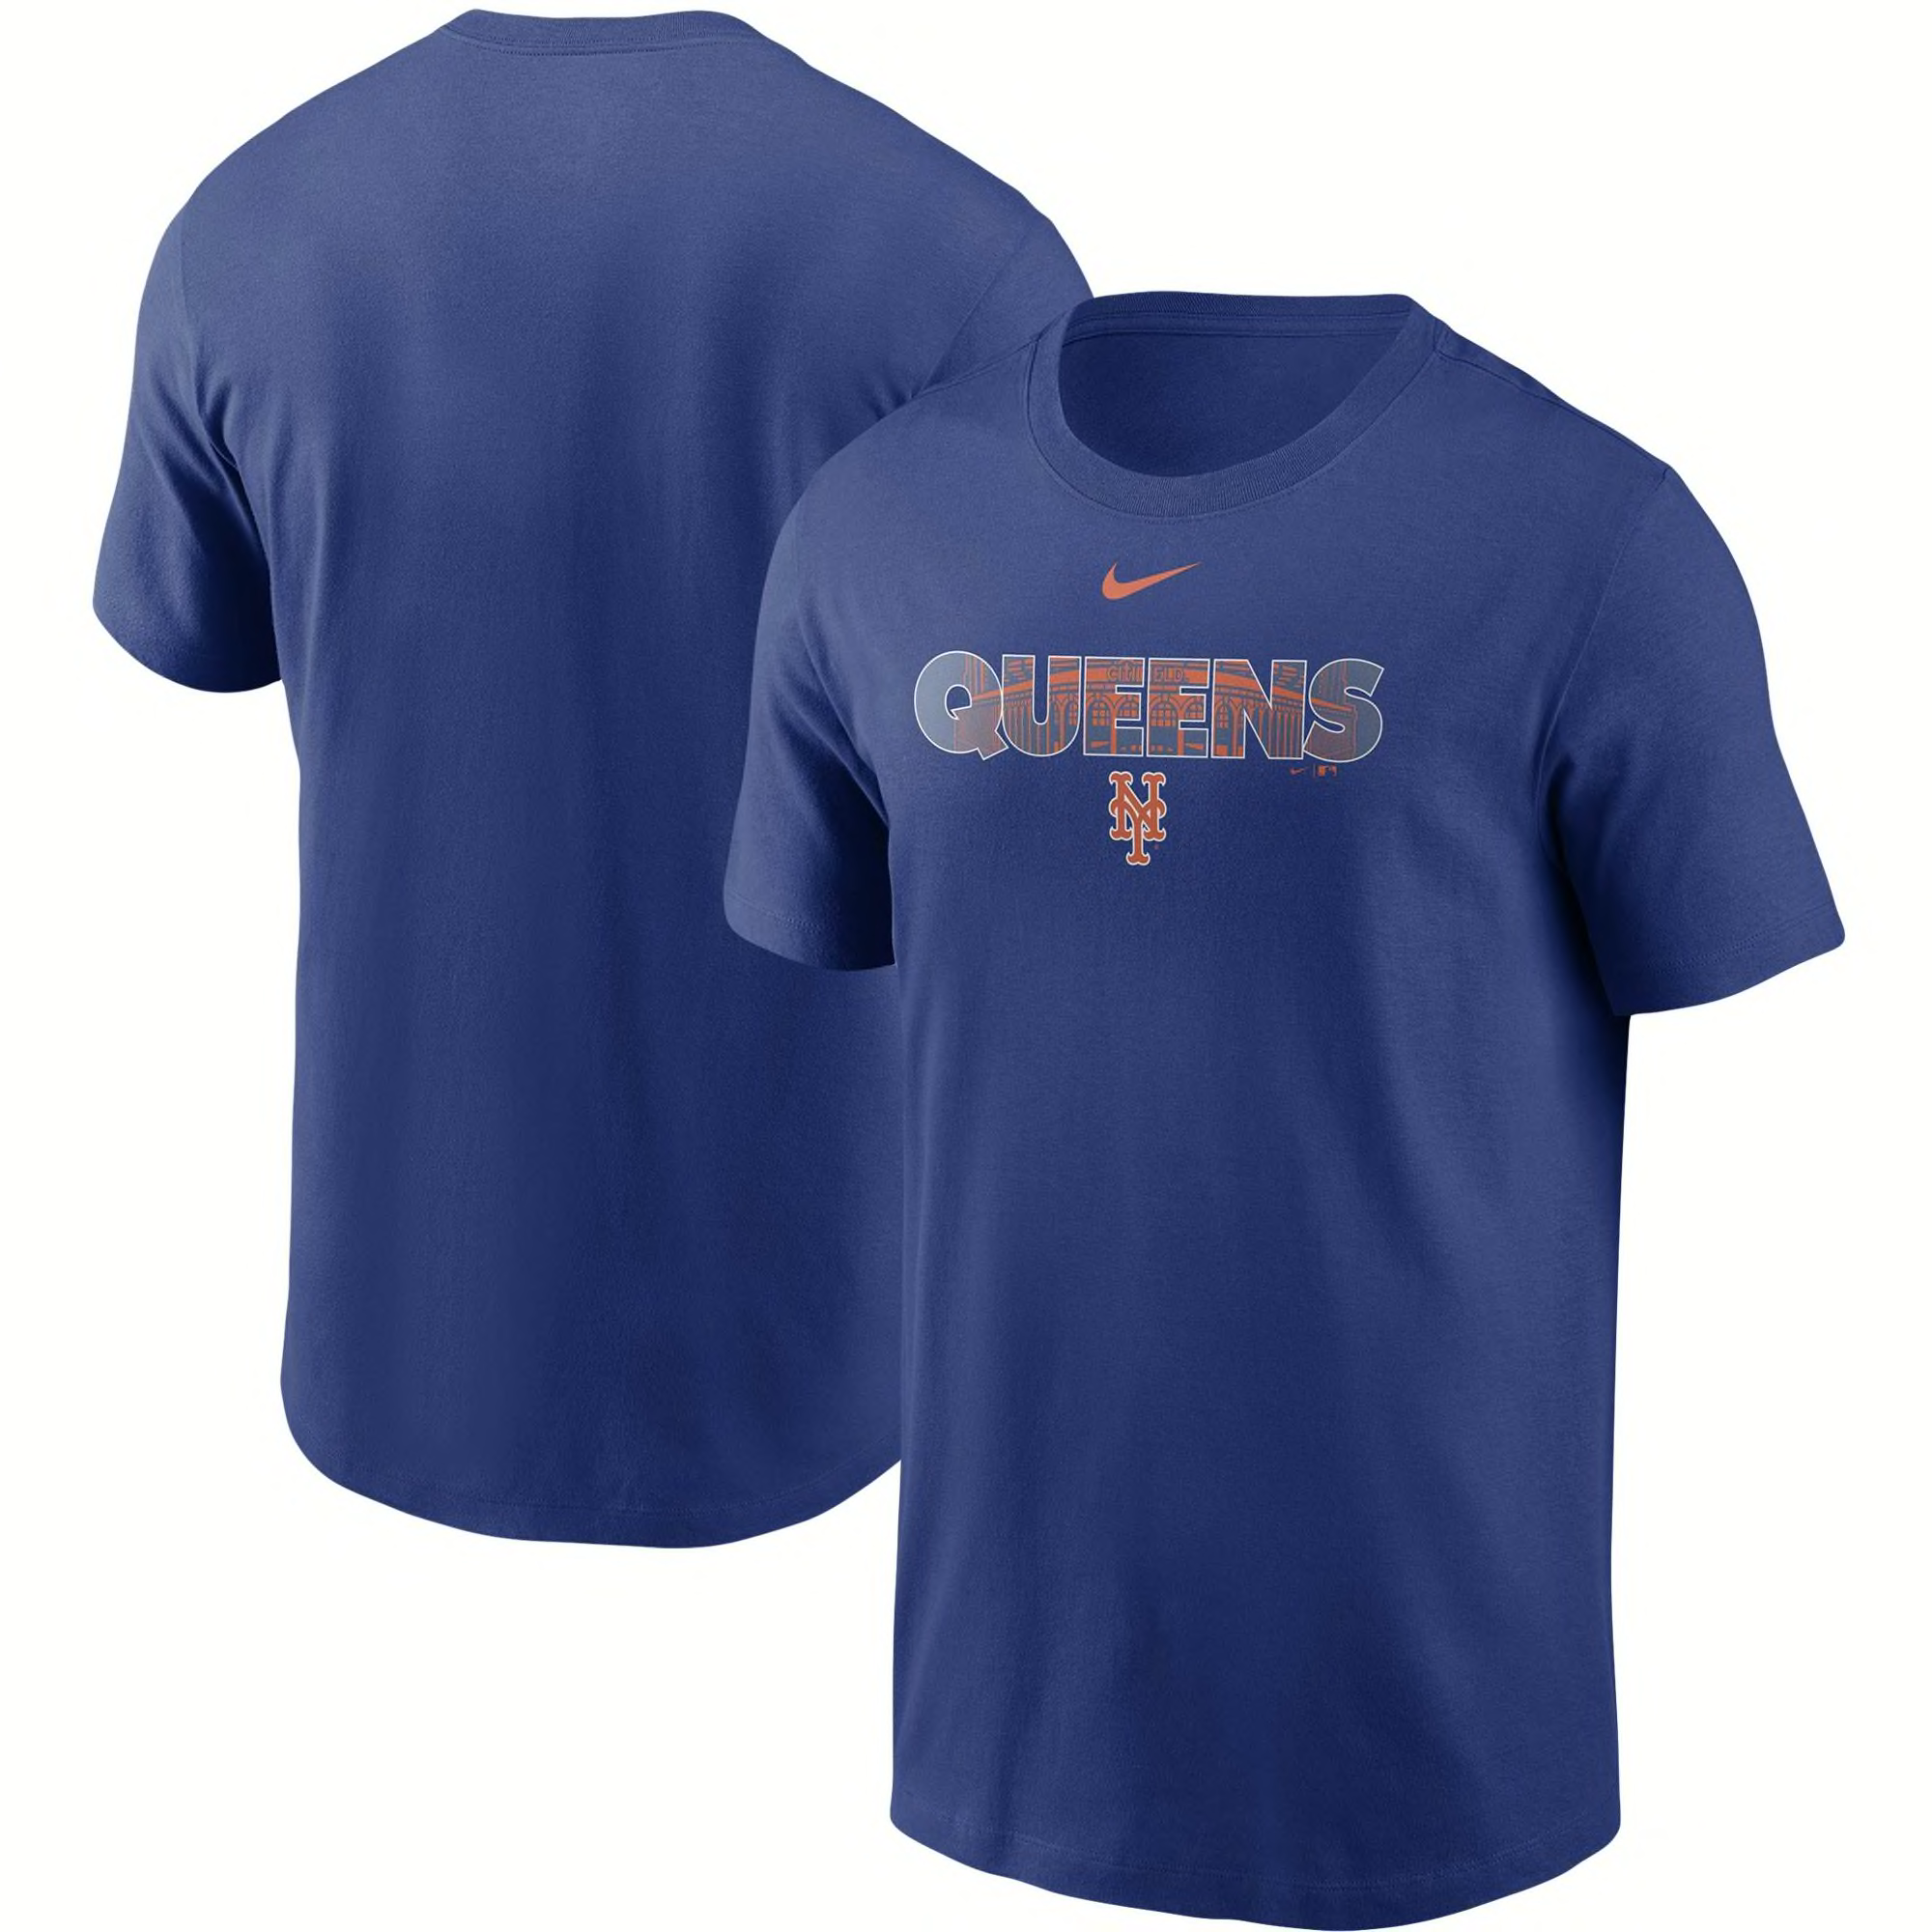 new york mets gifts